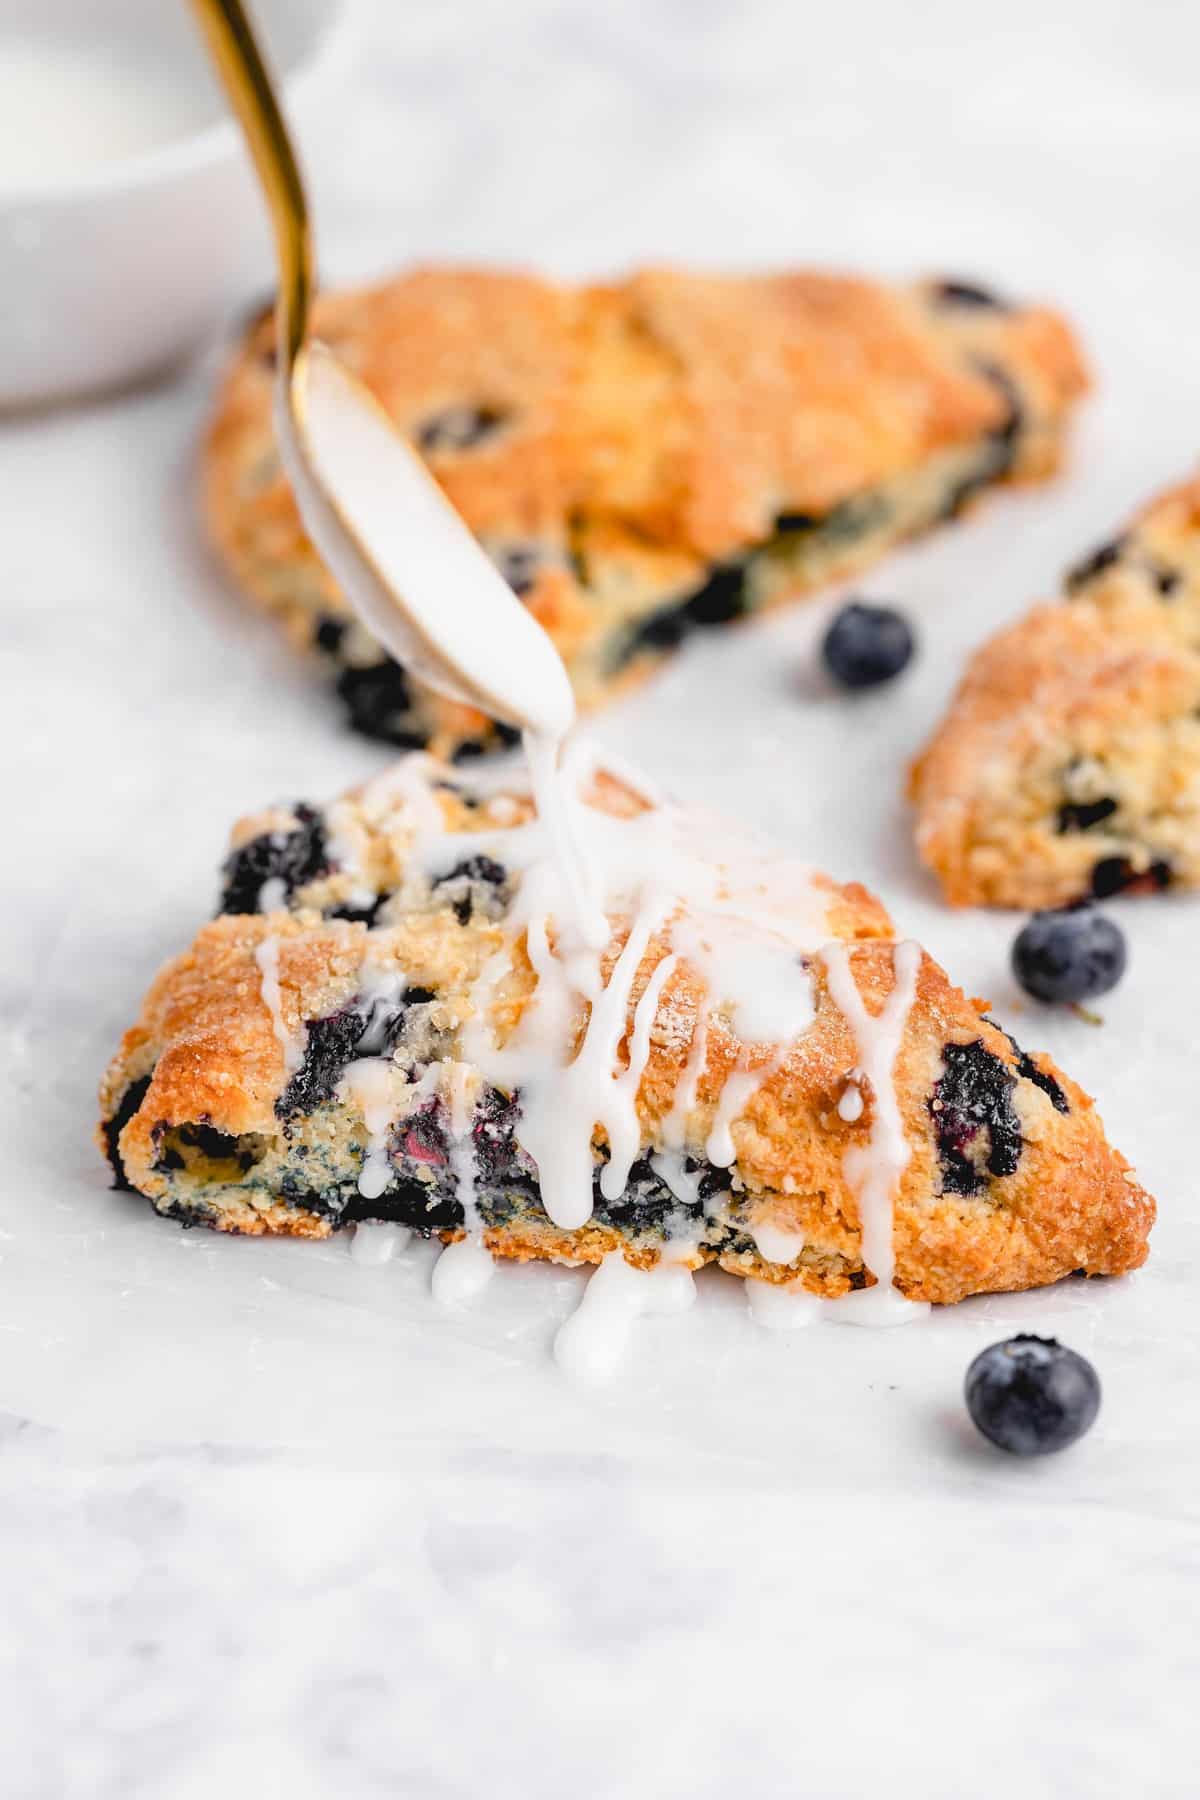 white glaze being drizzled onto a blueberry scone